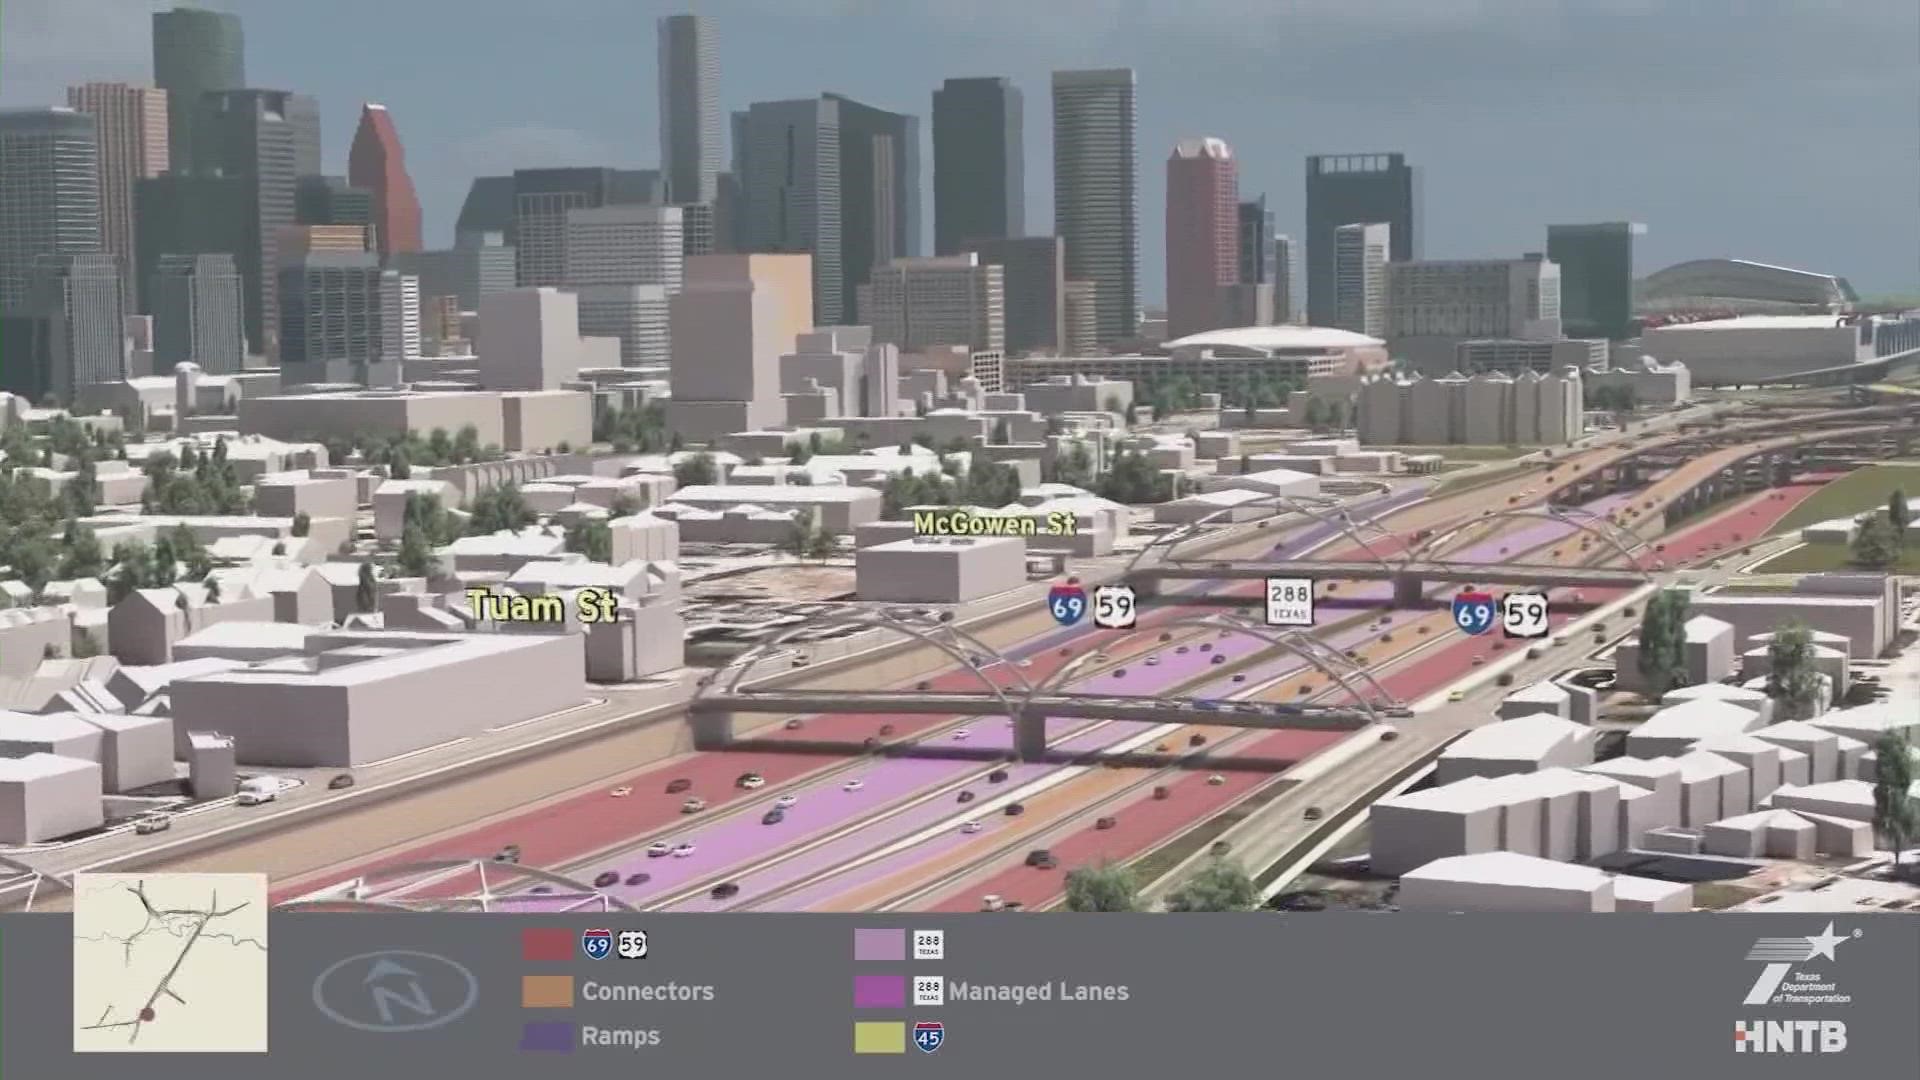 The I-45 expansion project will reconstruct the North Freeway between downtown and the Beltway.